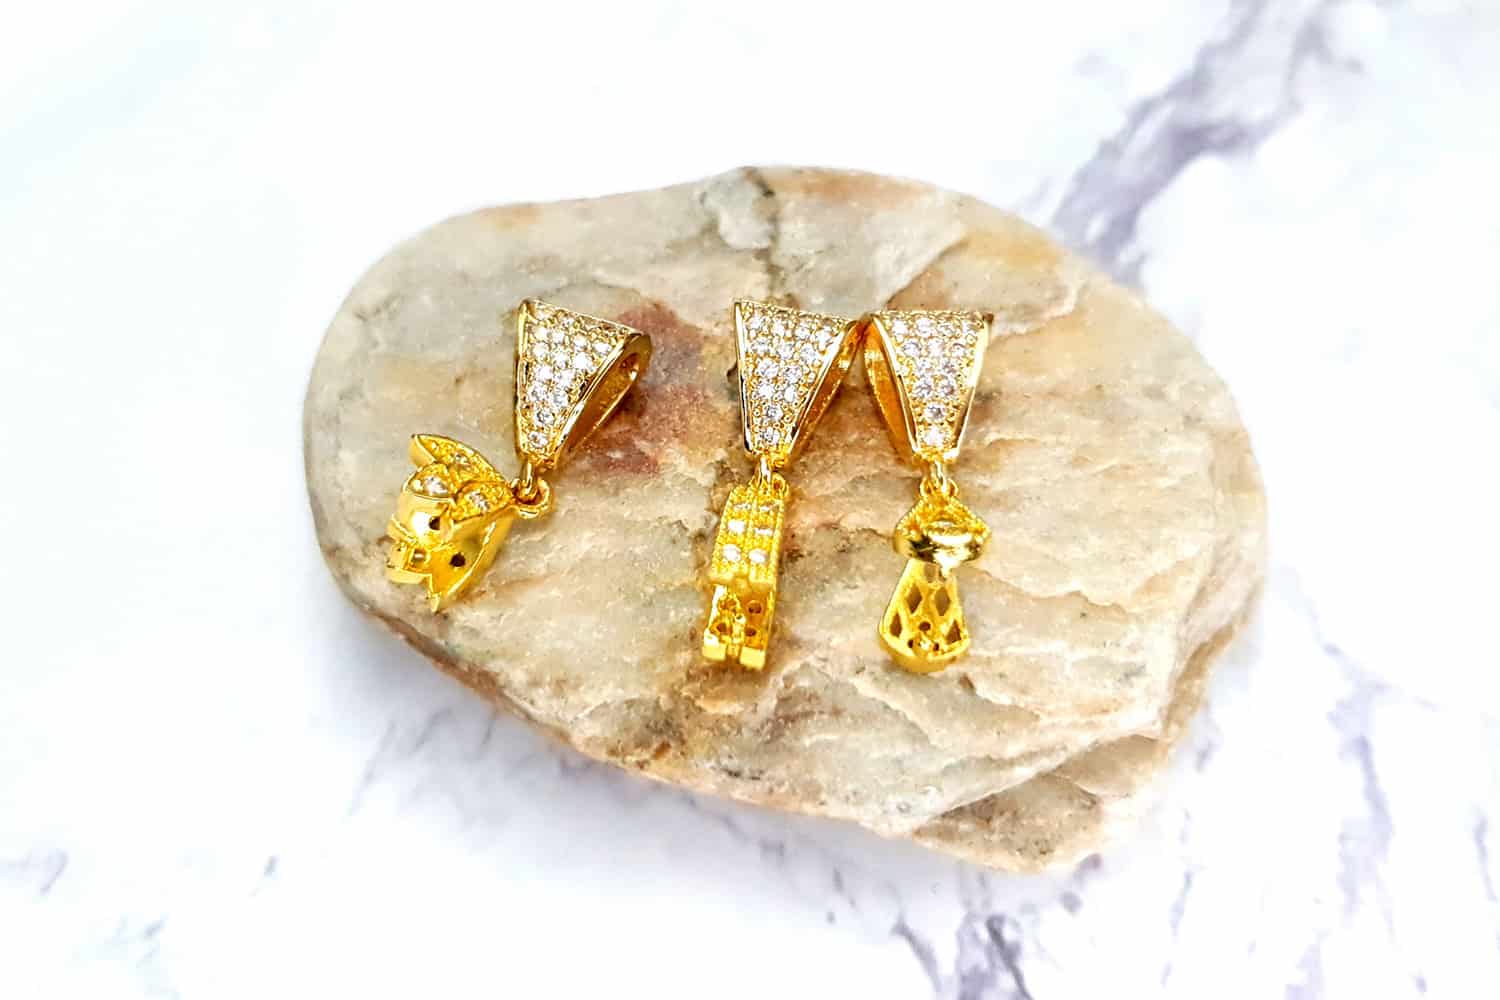 3 high quality golden crystals pendant pinch bail #25371